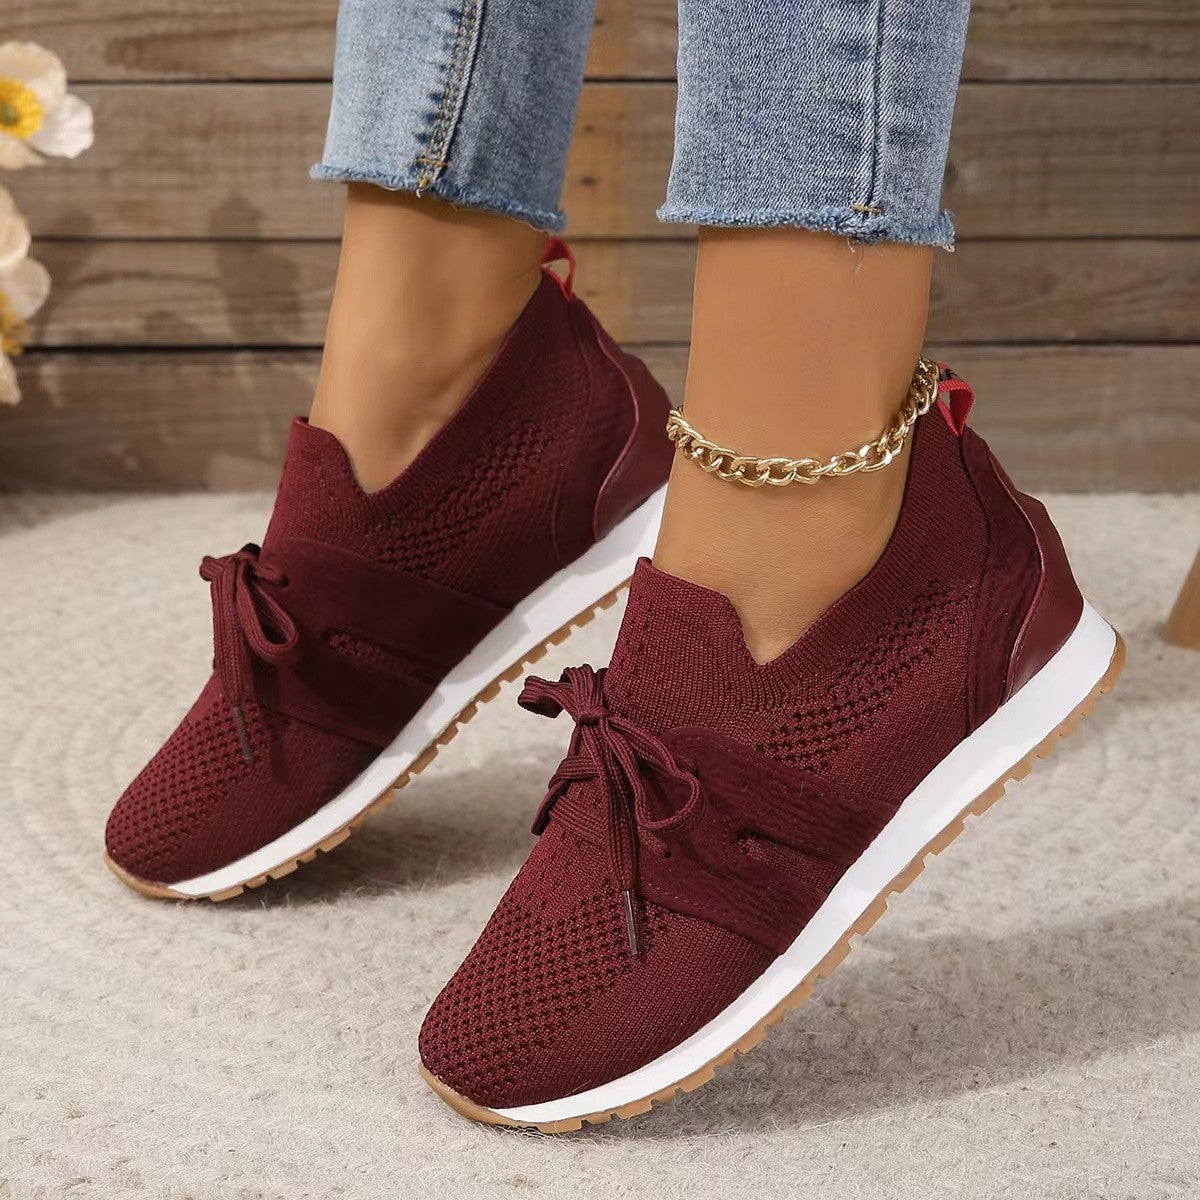 New Lace Up Mesh Flats Shoes For Women Breathable Casual Breathable Walking Wedges Shoes